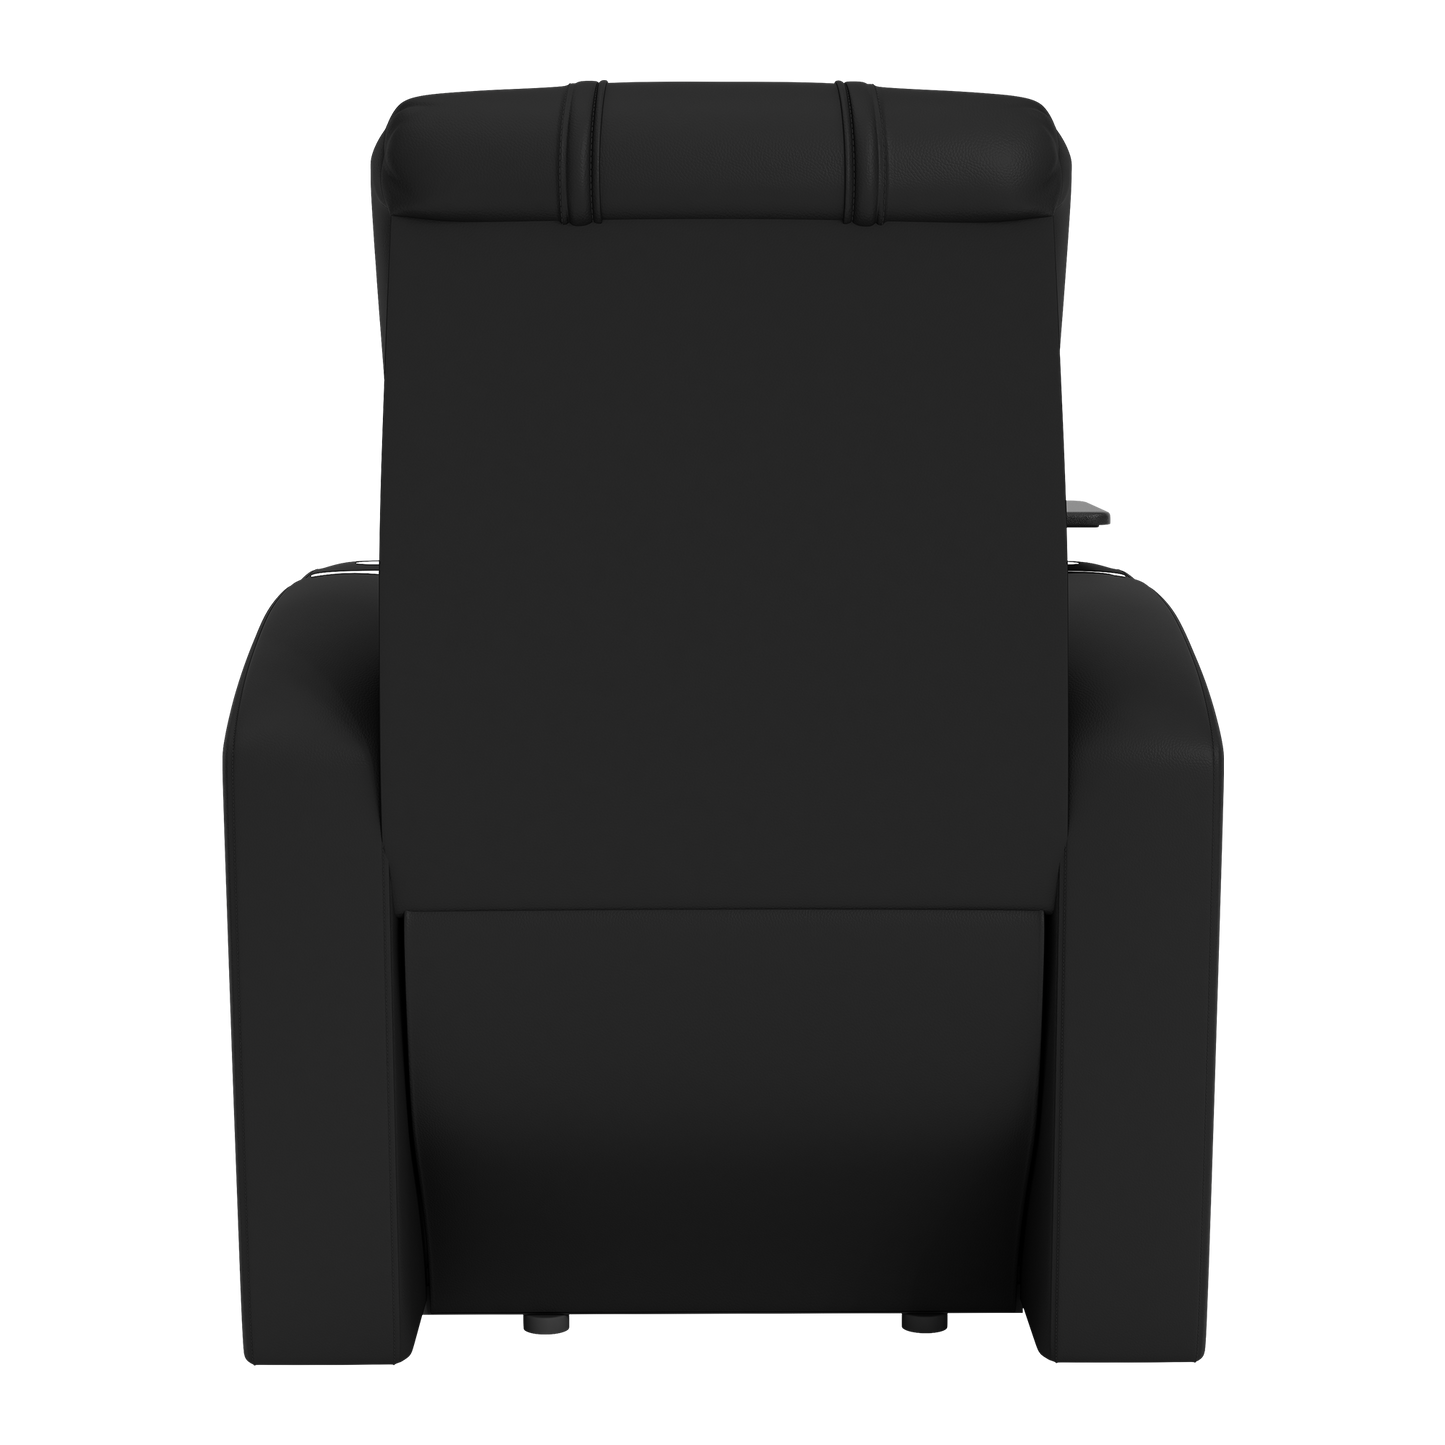 Stealth Power Plus Recliner with New York Mets Logo